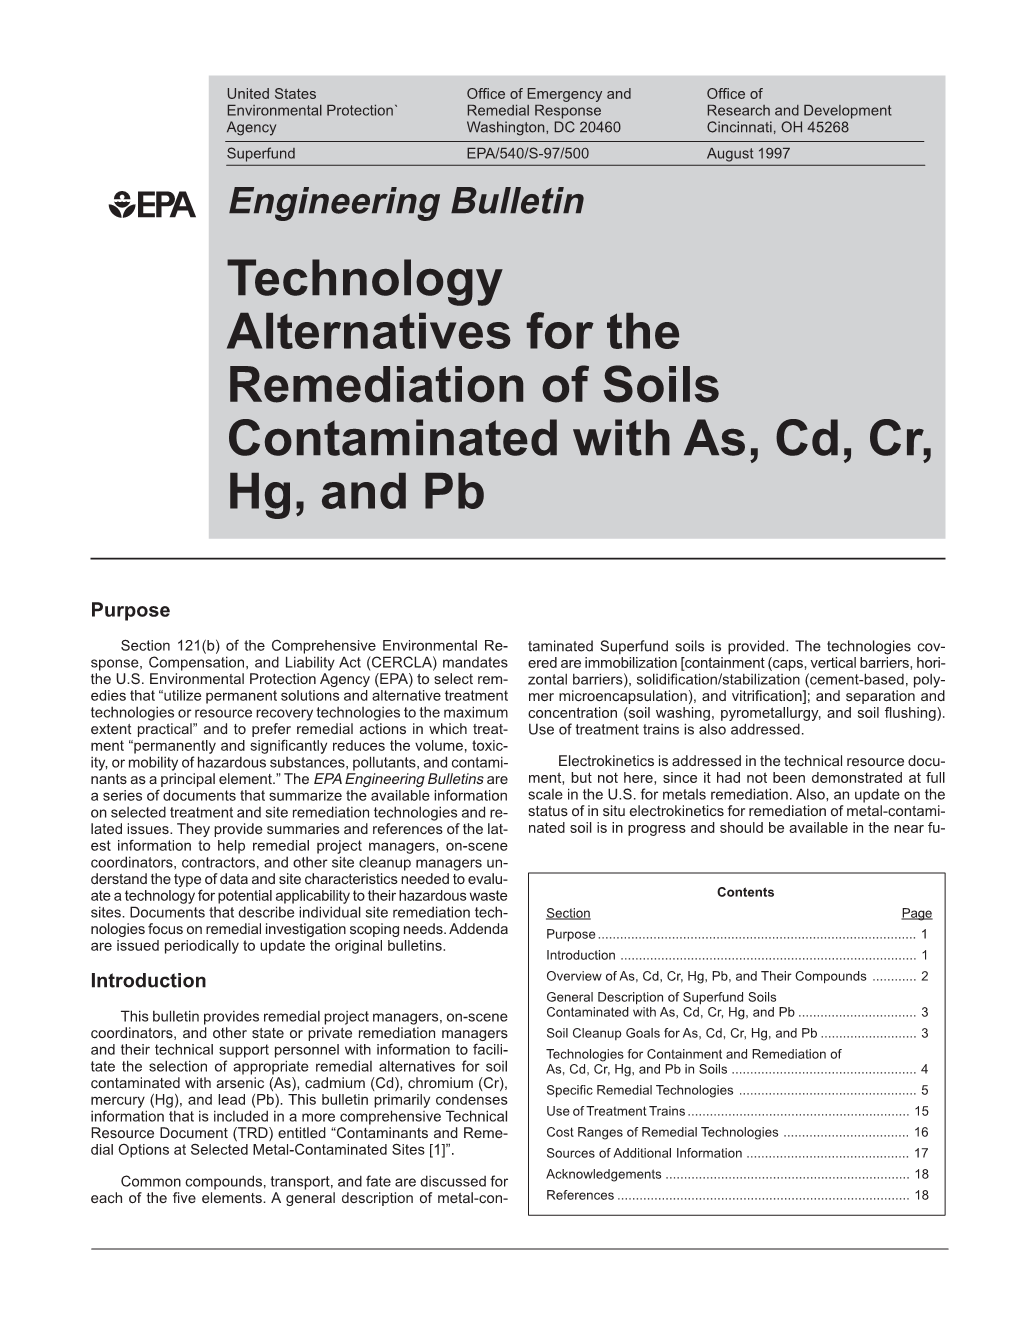 Technology Alternatives for the Remediation of Soils Contaminated with As, Cd, Cr, Hg, and Pb